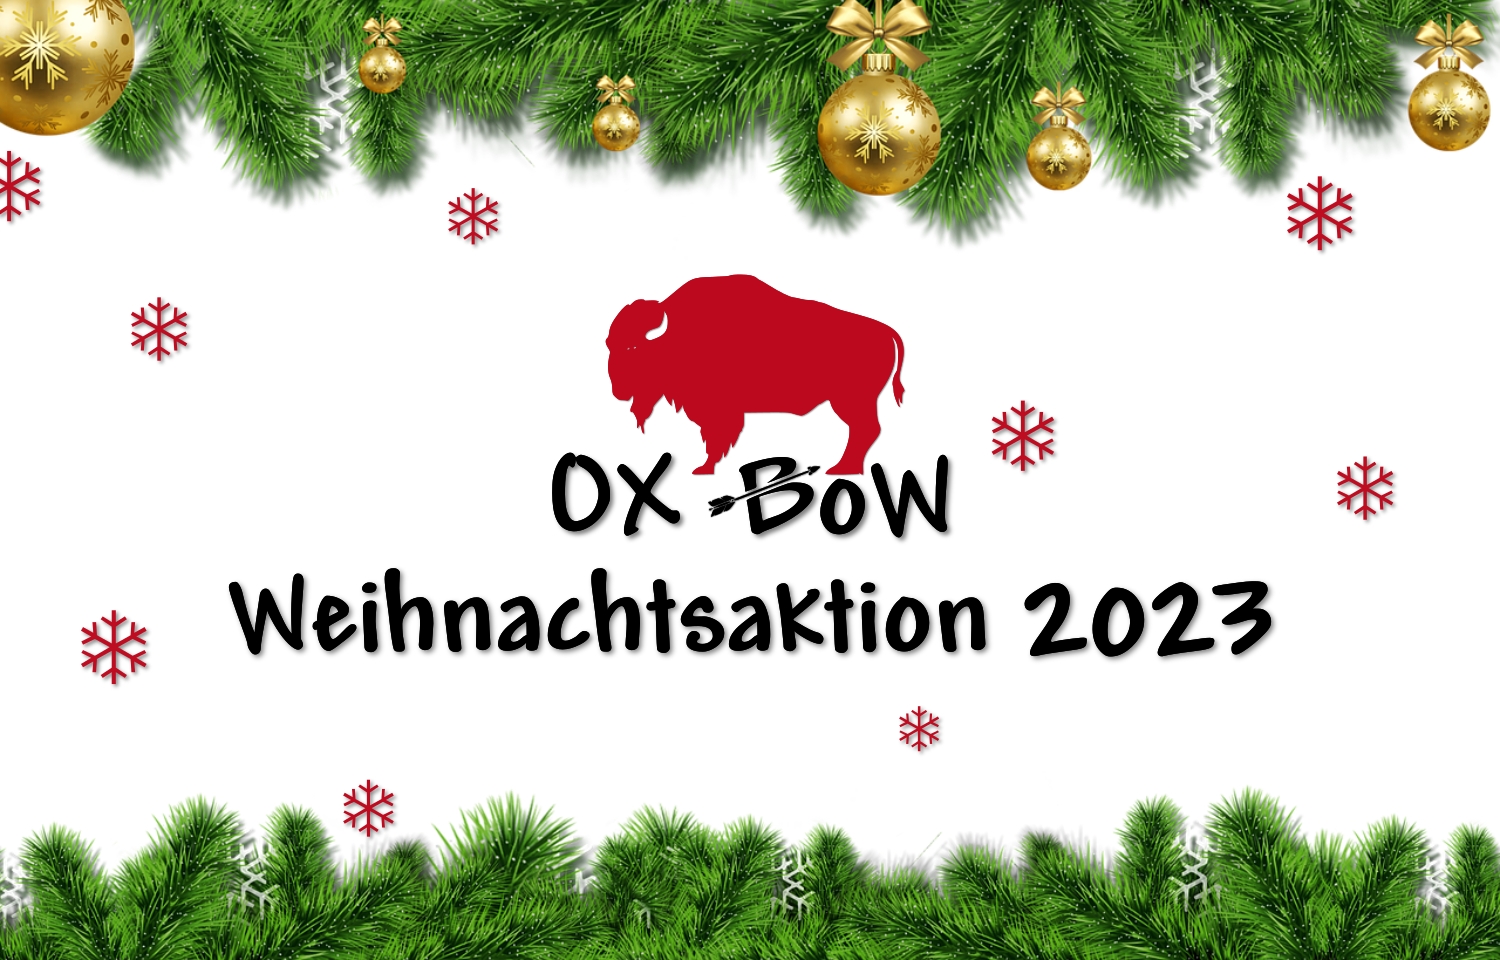 OX-BoW Weihnachtsaktion